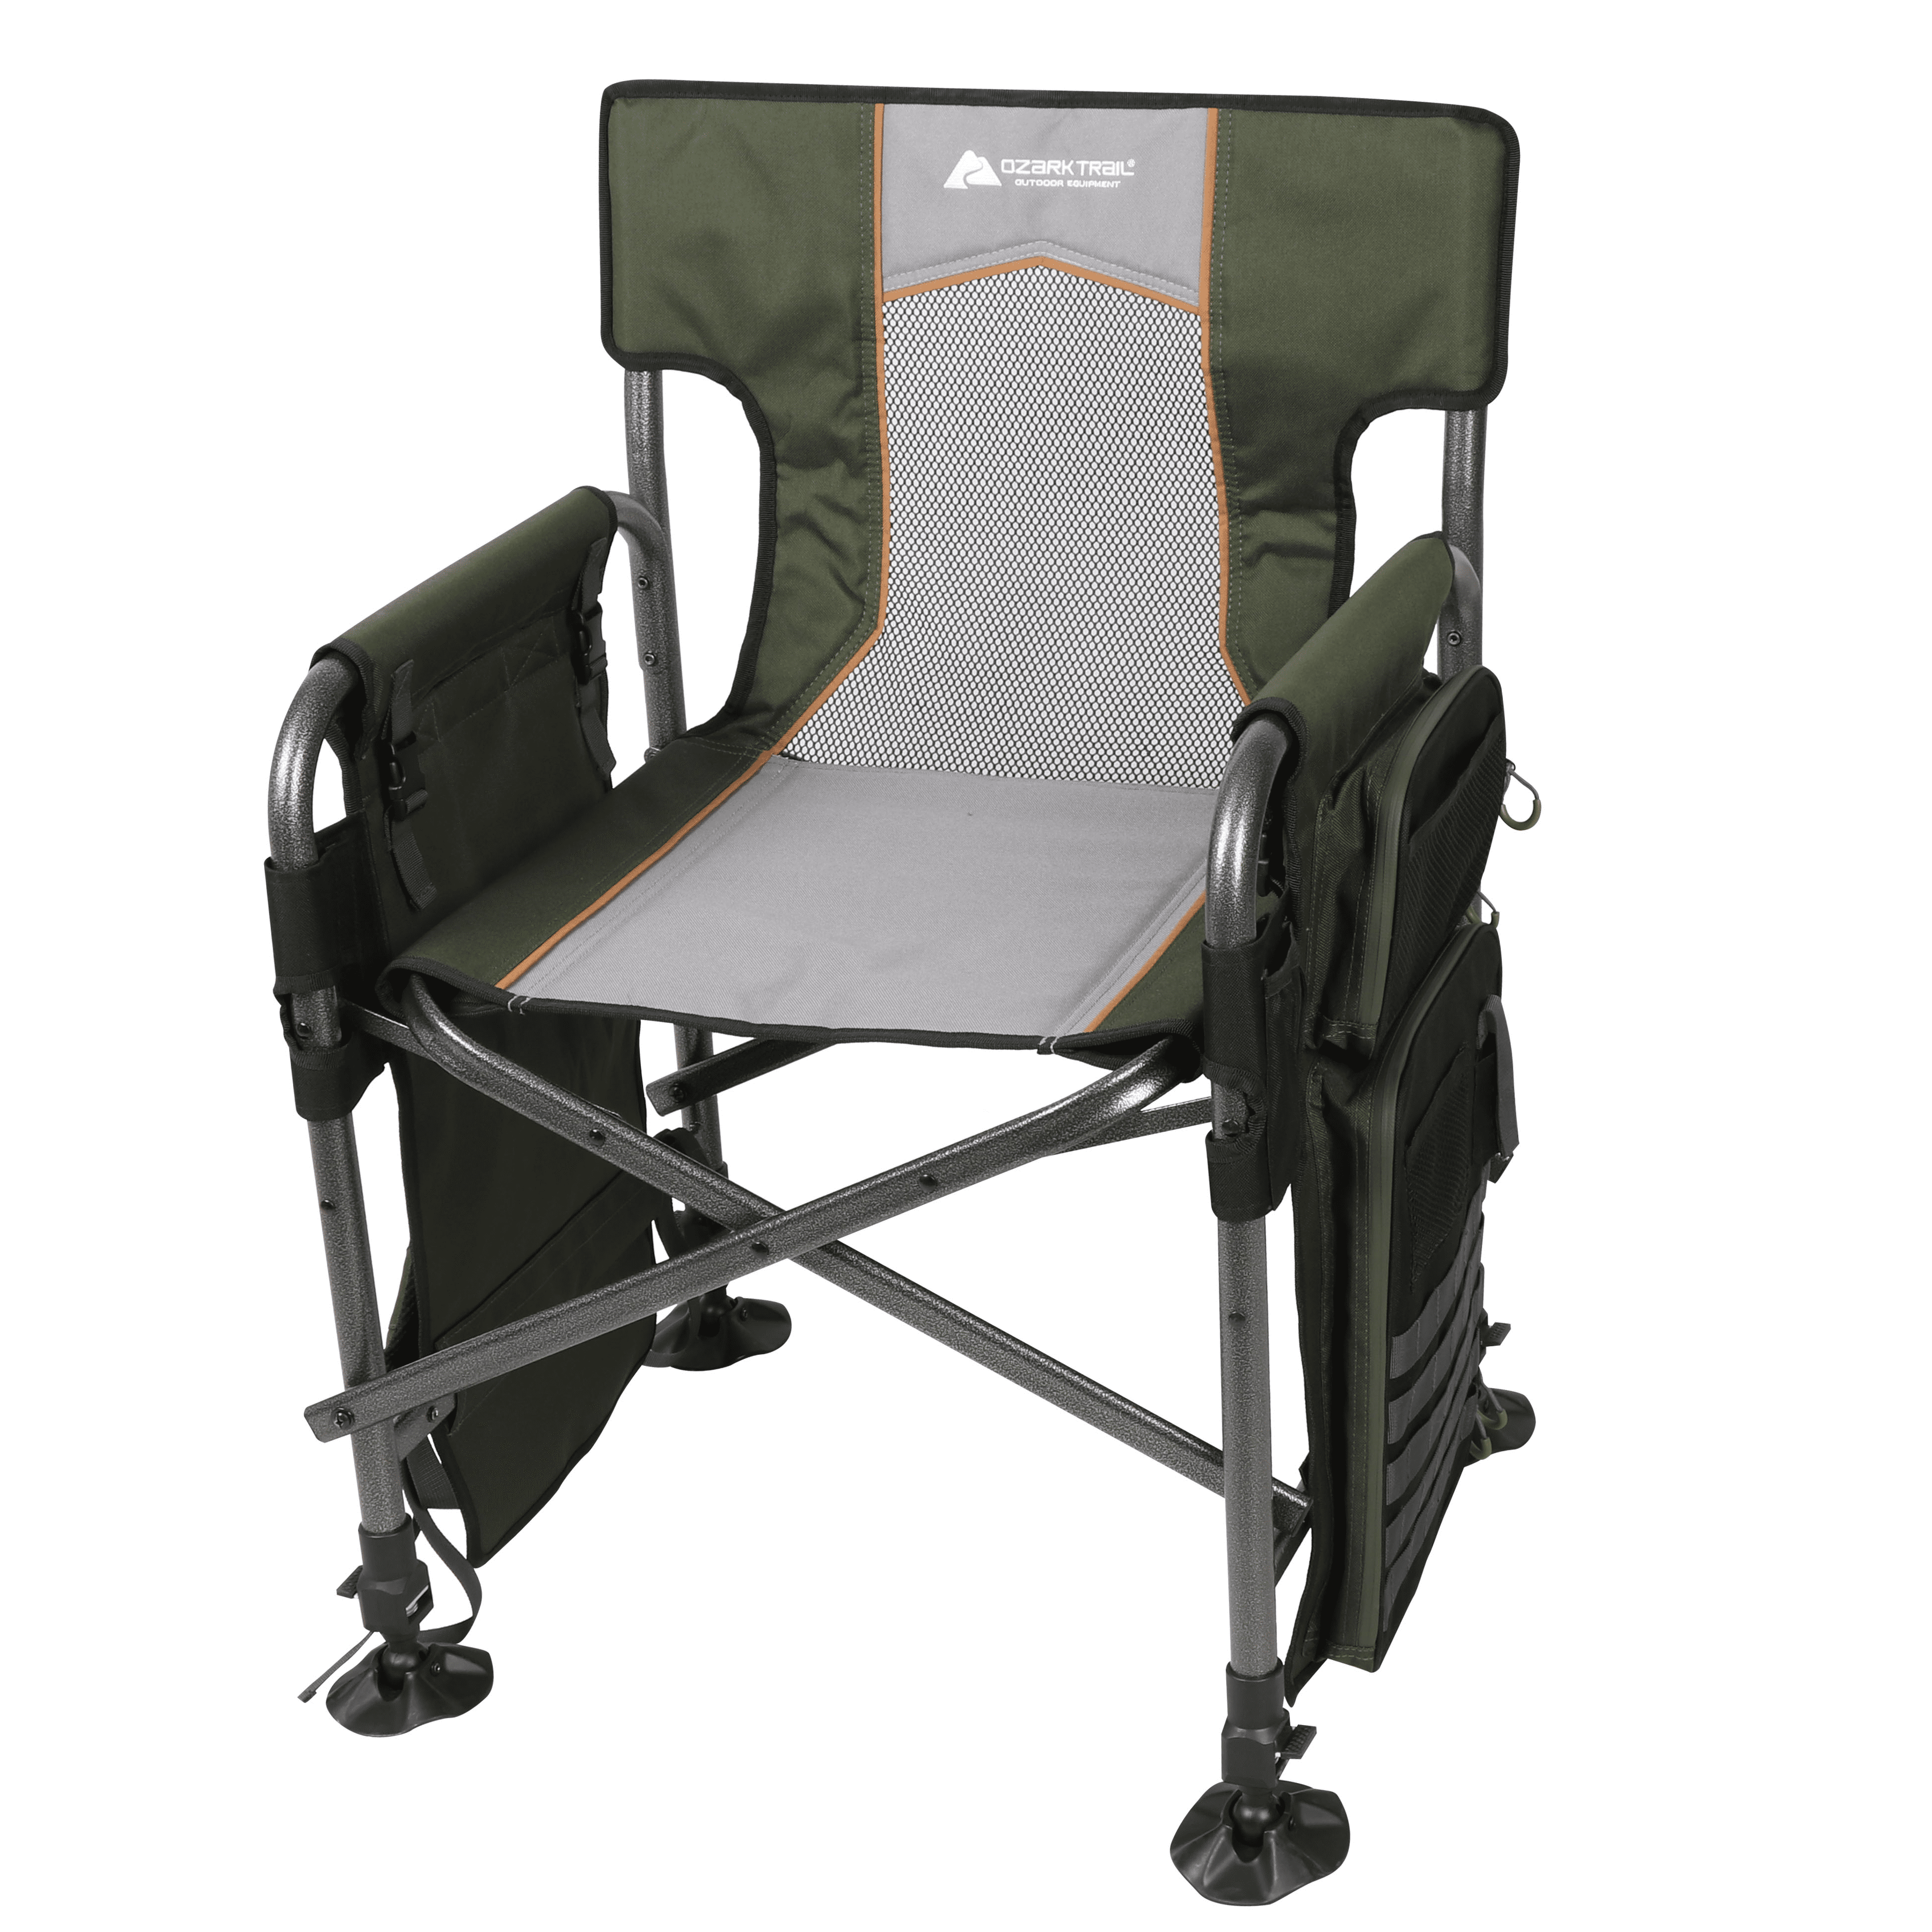 Ozark Trail Fishing Steel Director's Chair with Rod Holder, Green